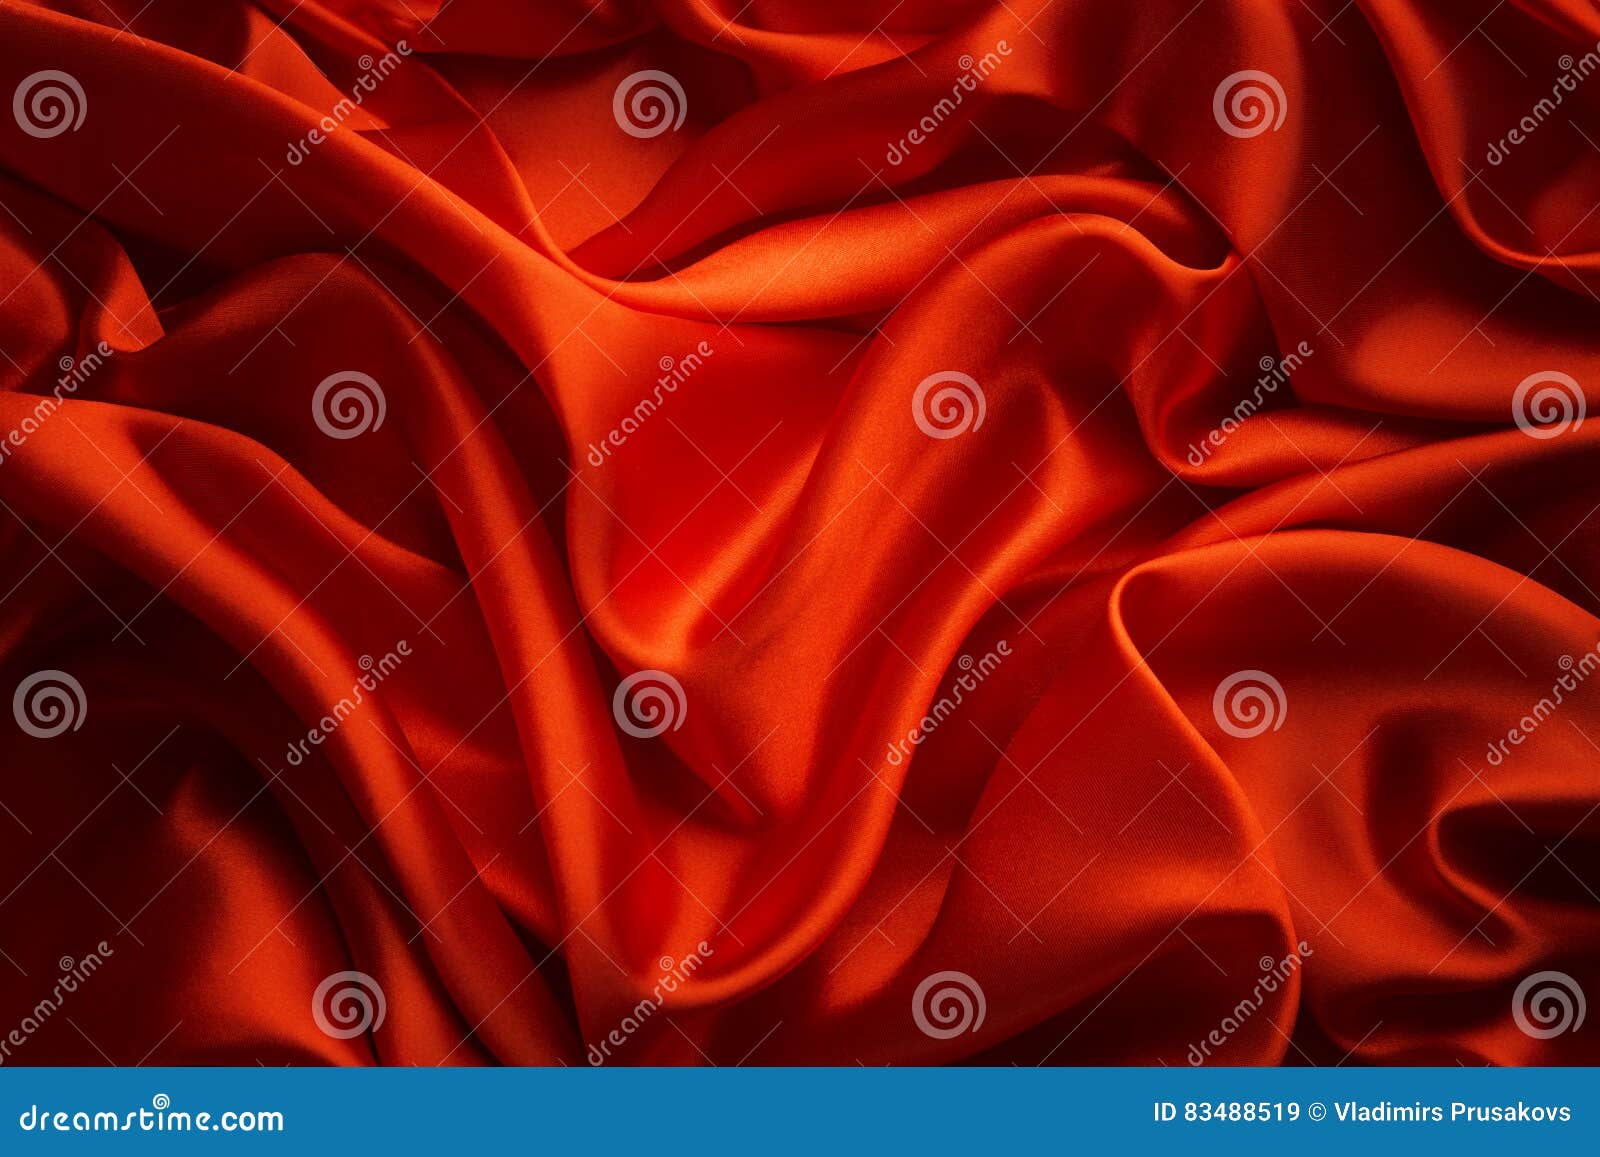 Silk Cloth Background, Red Satin Fabric Waves, Abstract Texture